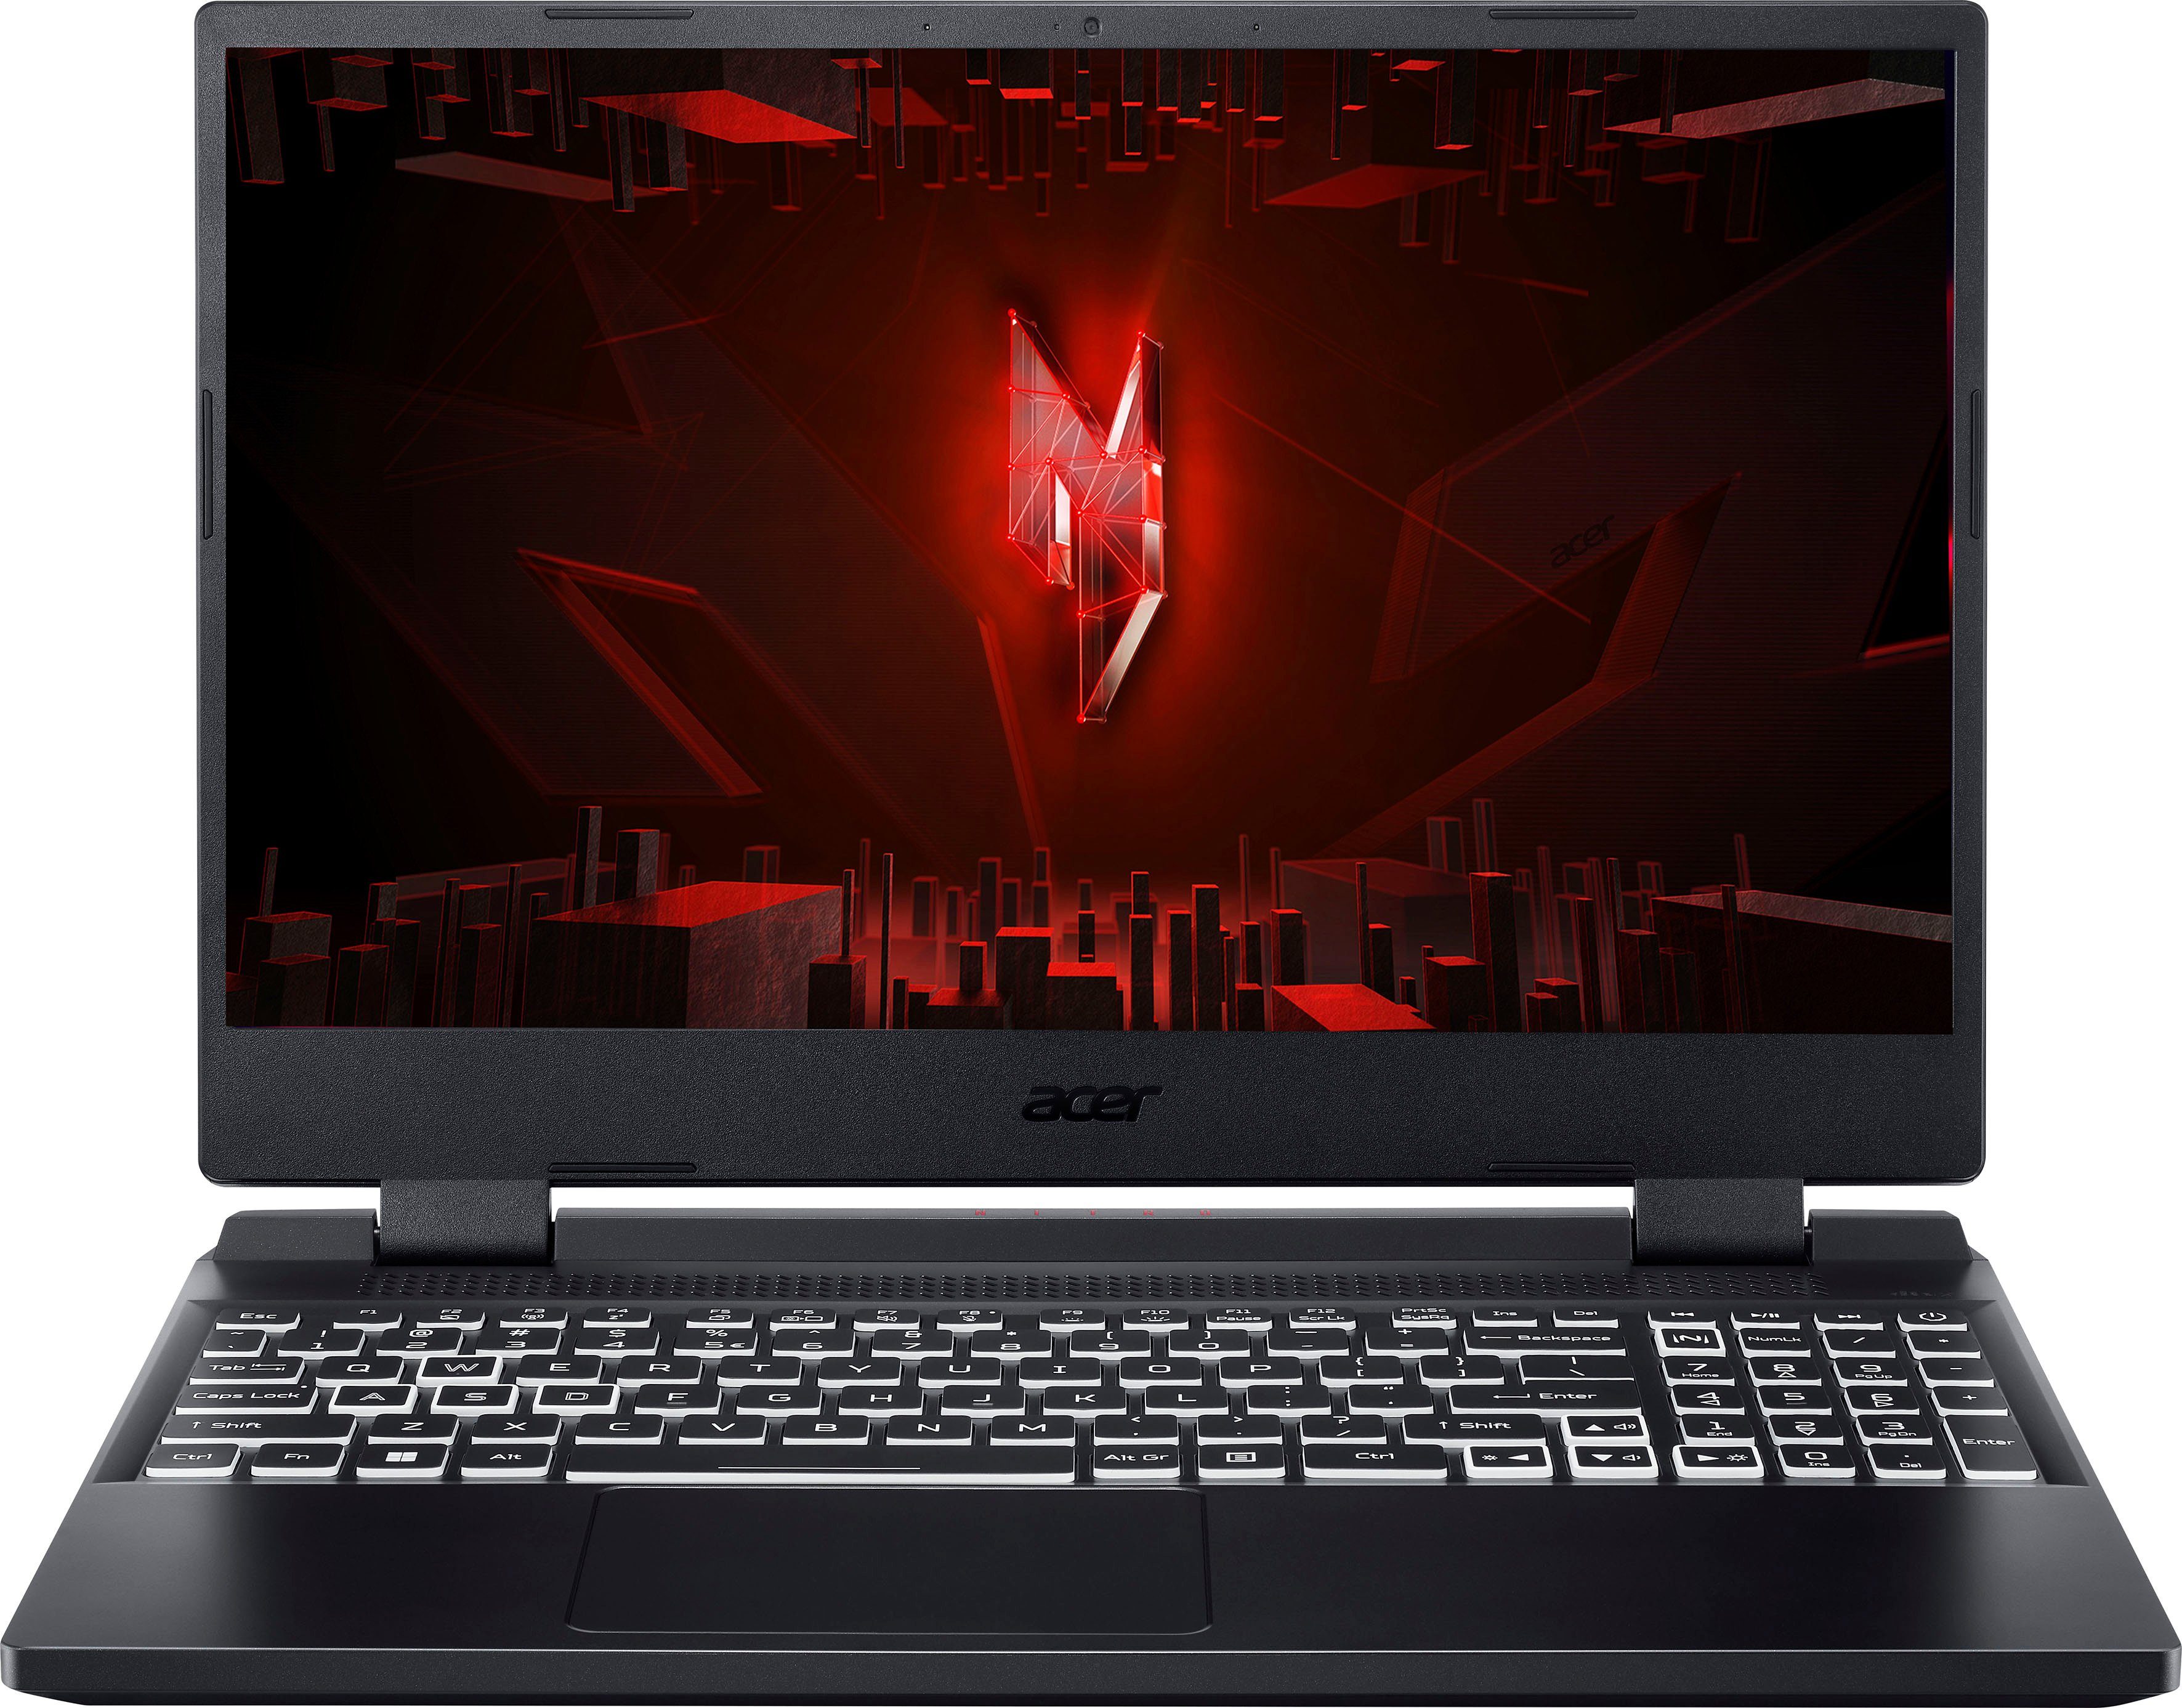 Intel Acer Zoll, RTX GB GeForce Core AN515-58-79LV 5 i7 12700H, Gaming-Notebook cm/15,6 Thunderbolt™ 4) Nitro 4050, SSD, (39,62 512